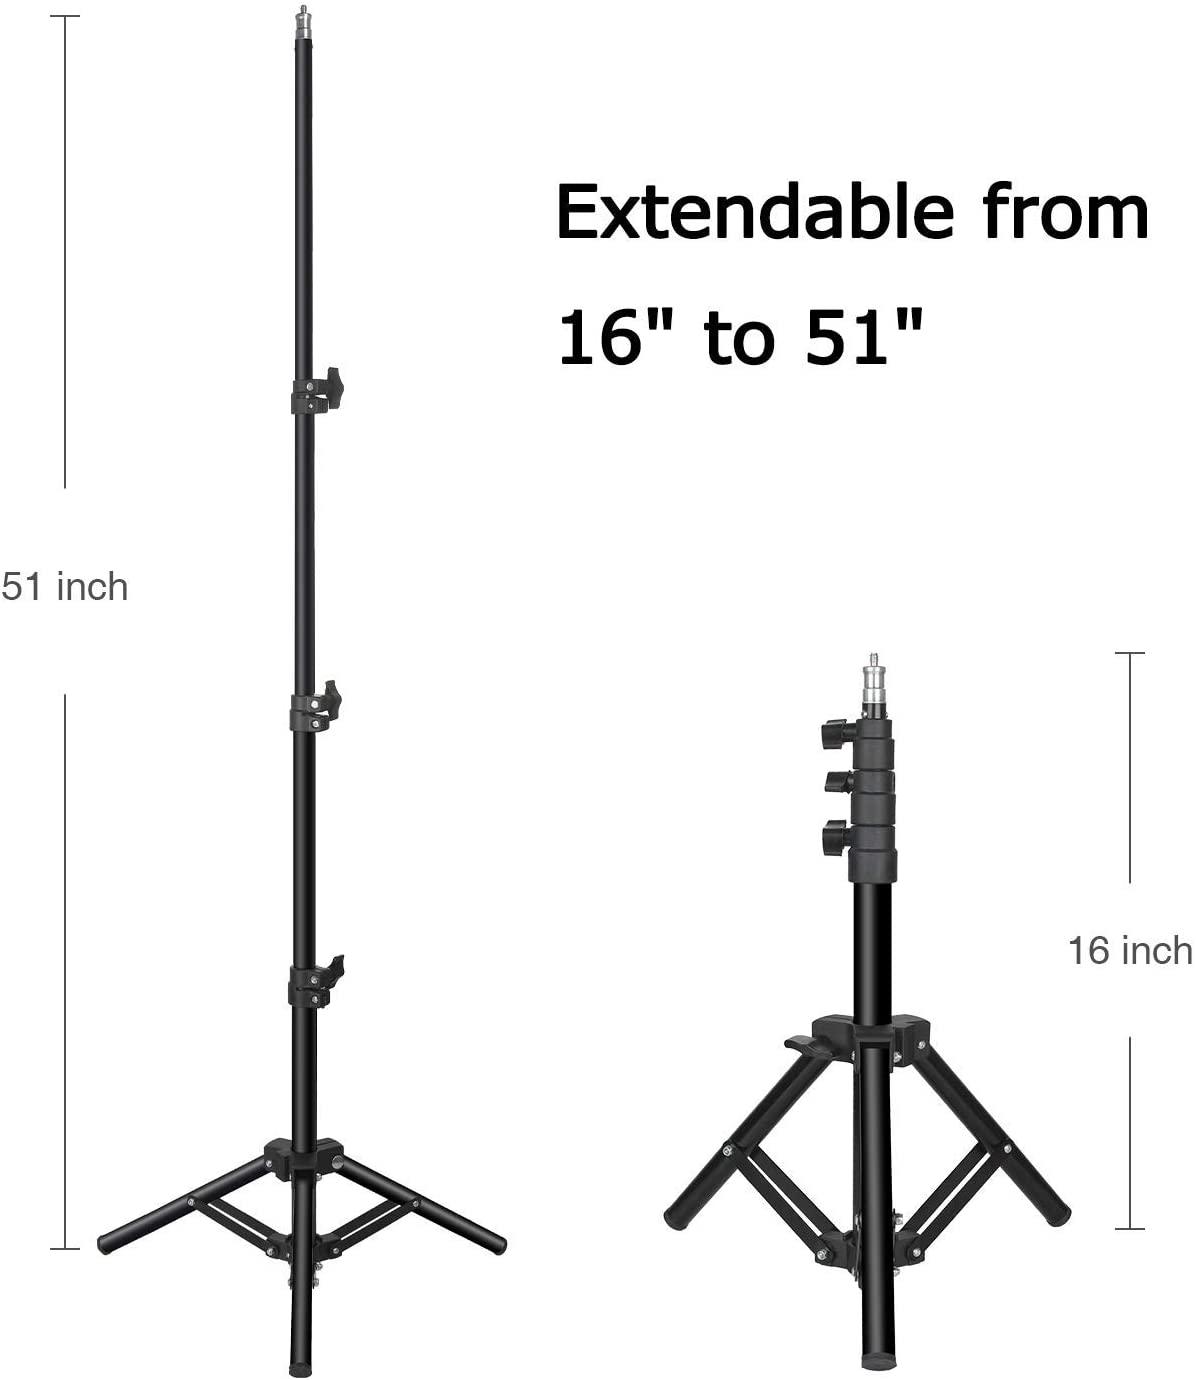 Extendable height of light stand